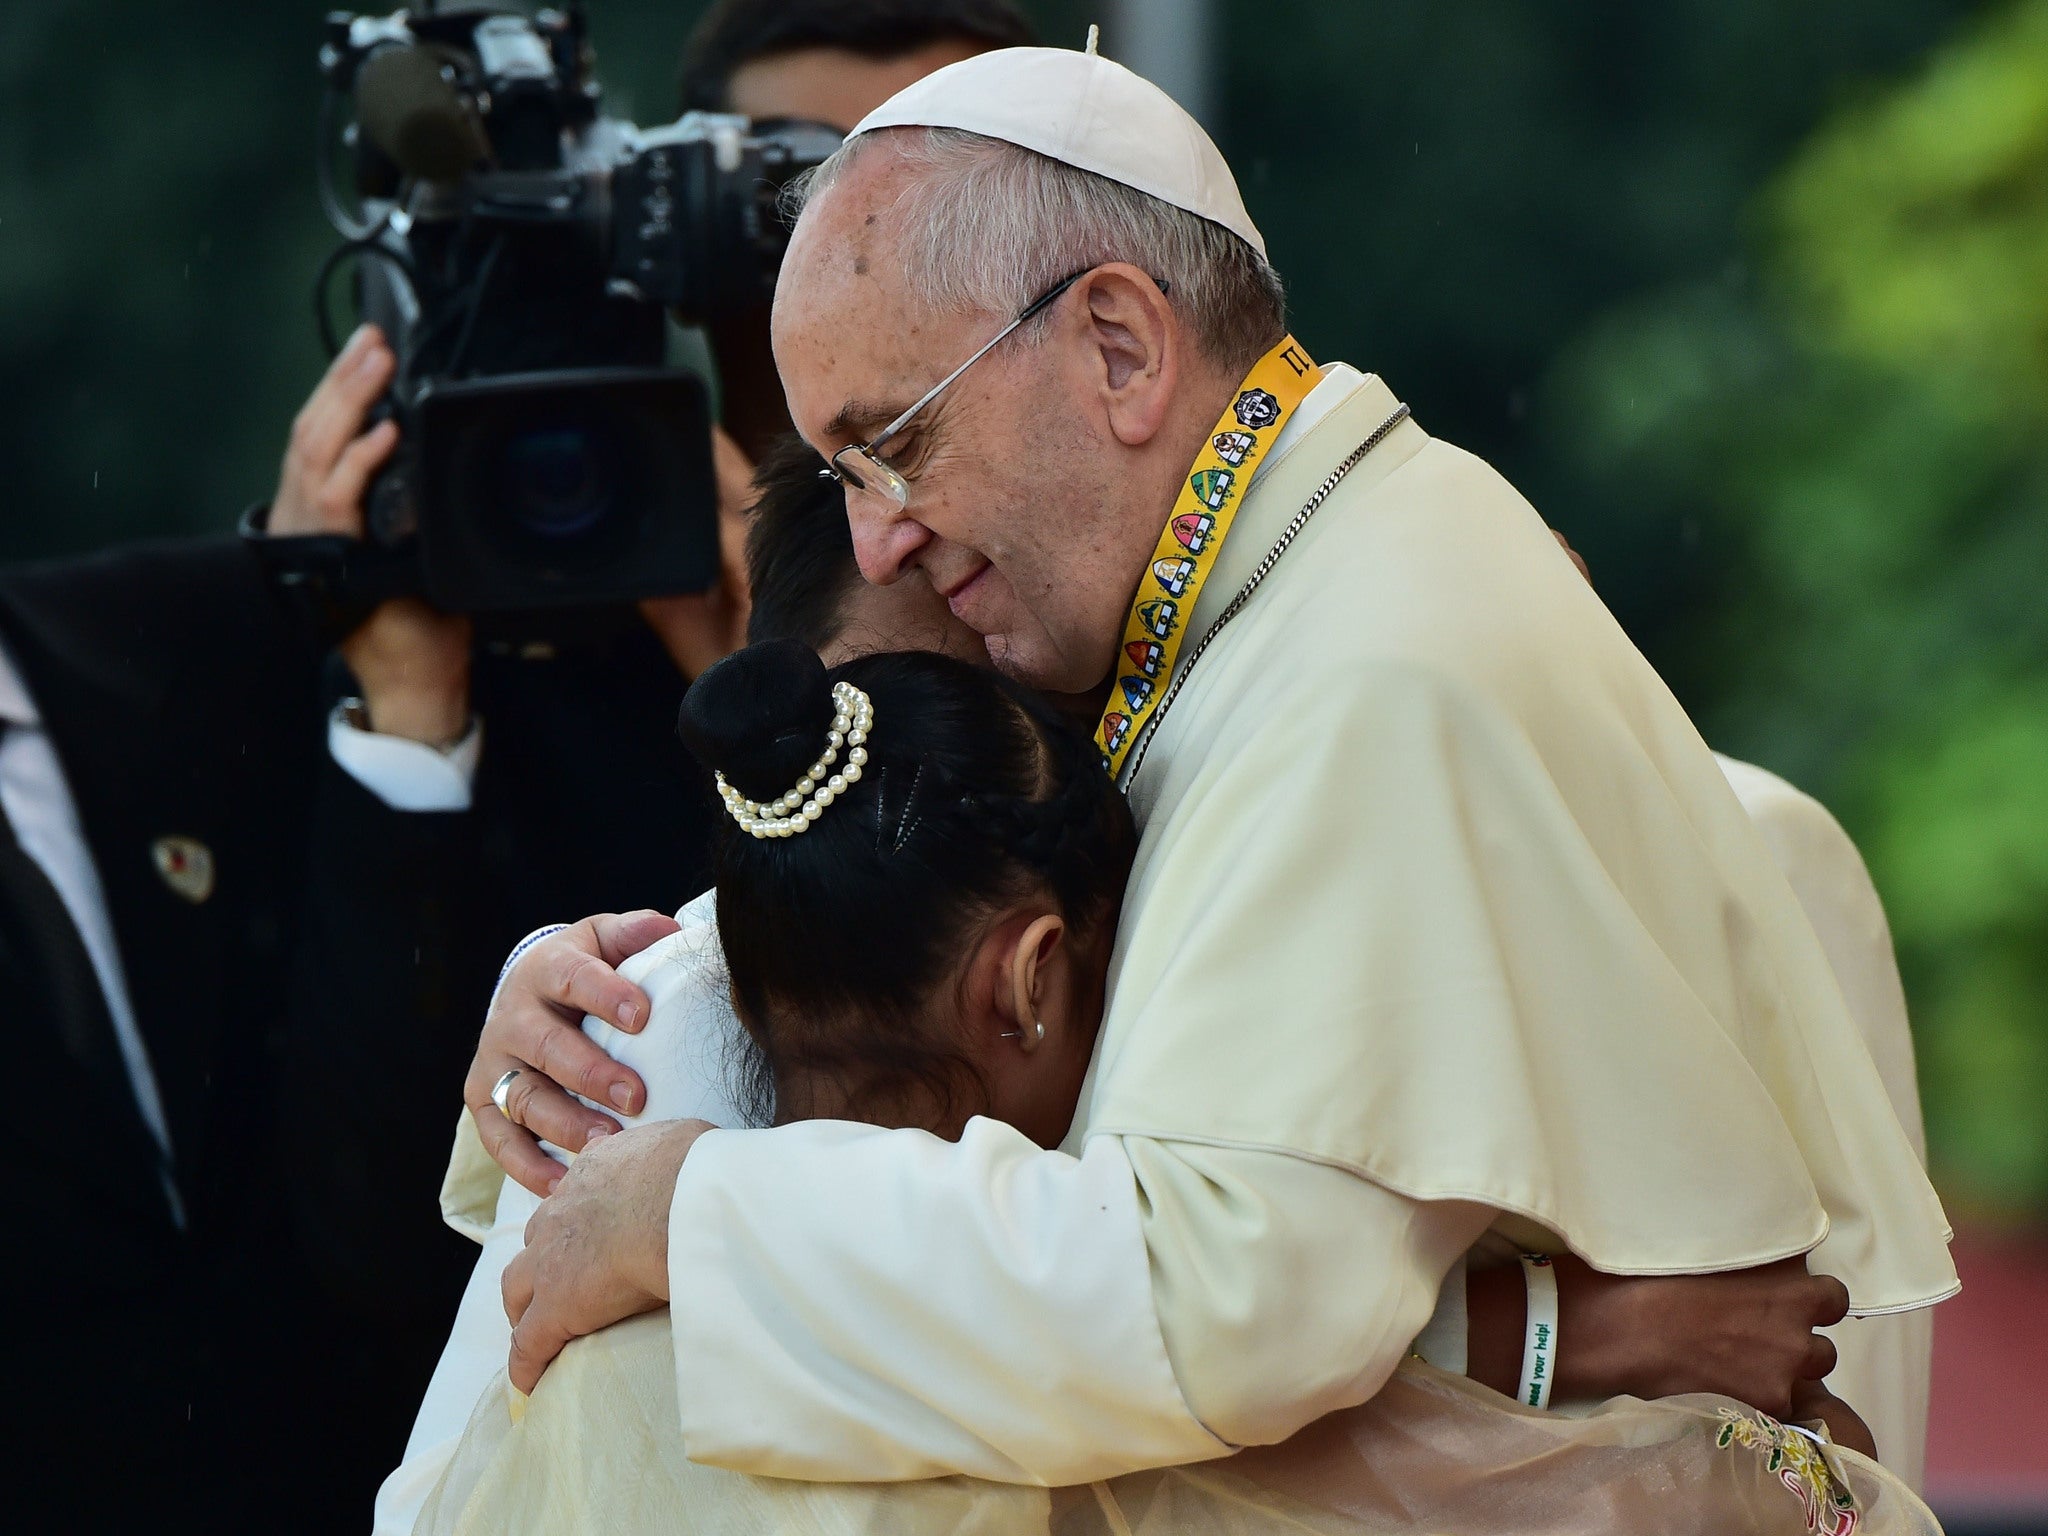 Pope Francis (R) embraces two children, including 12-year-old Glyzelle Palomar (2nd R), during his visit to the University of Santo Tomas in Manila